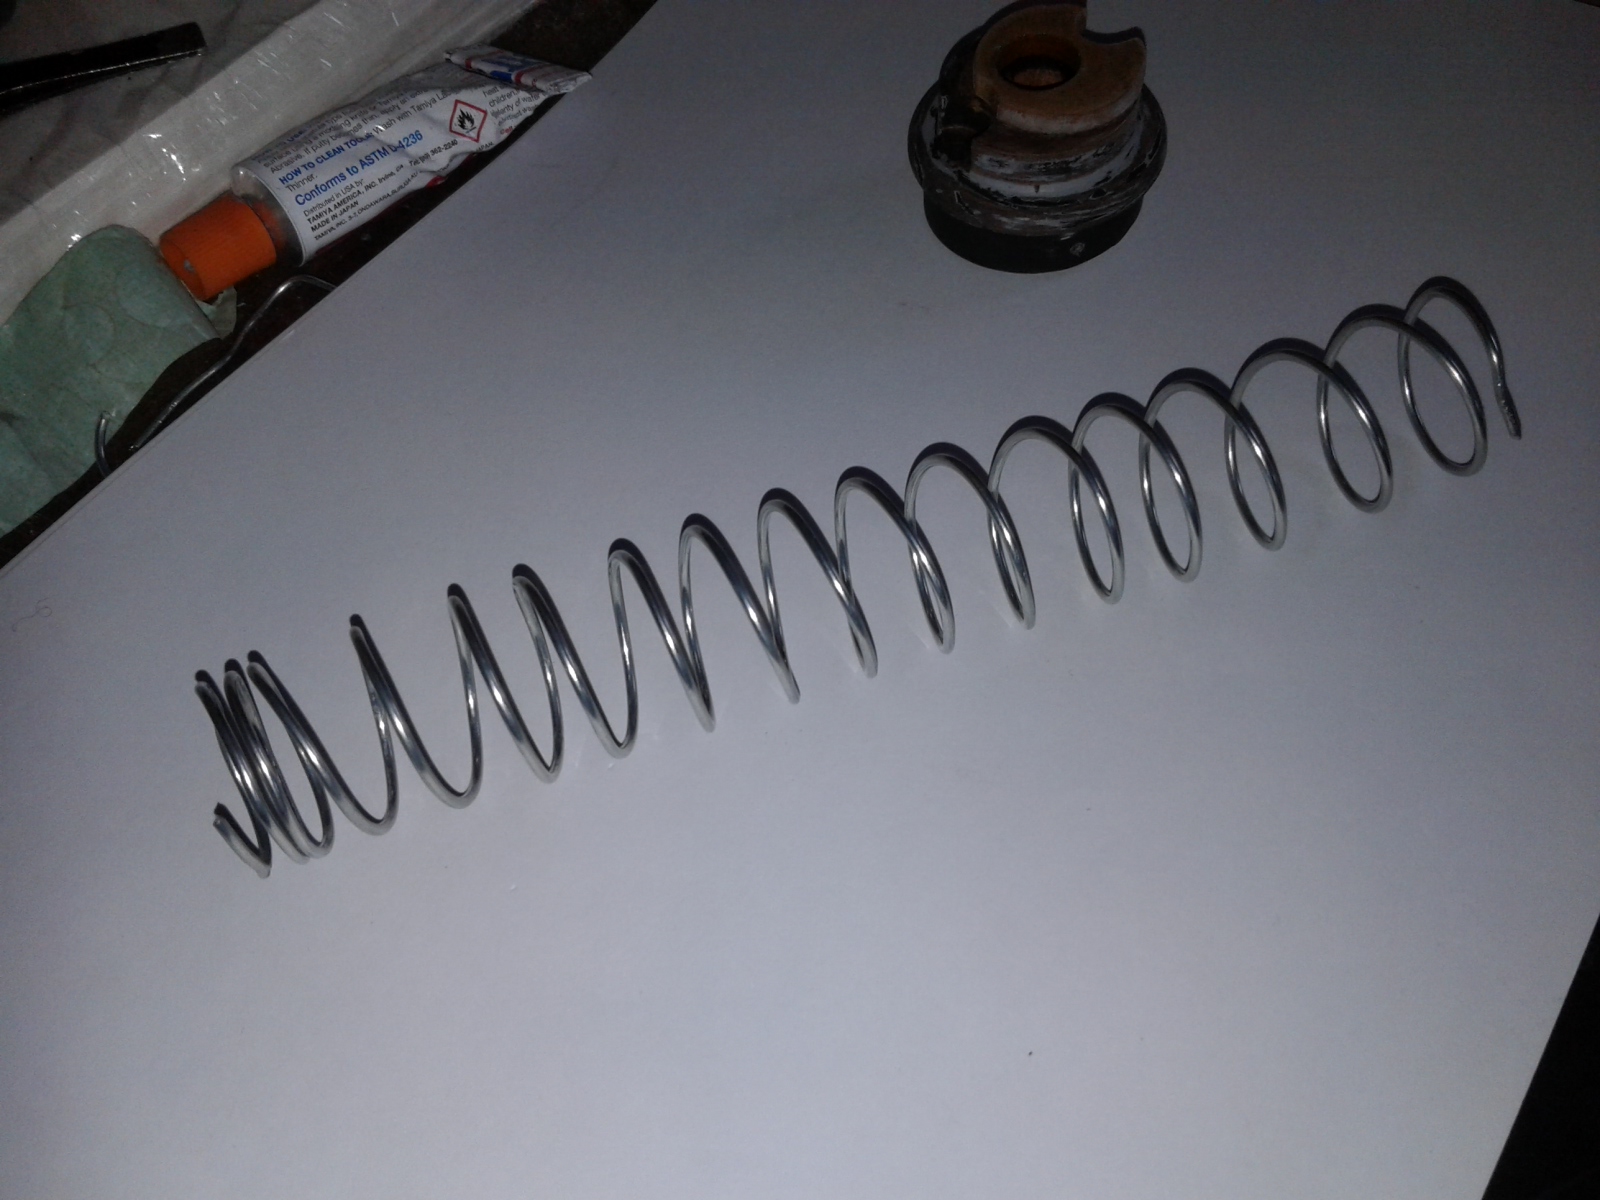 Made the spring by bending some 1.6g Tie-Wire round a piece of dowel and then spreading the coils the same distance apart.